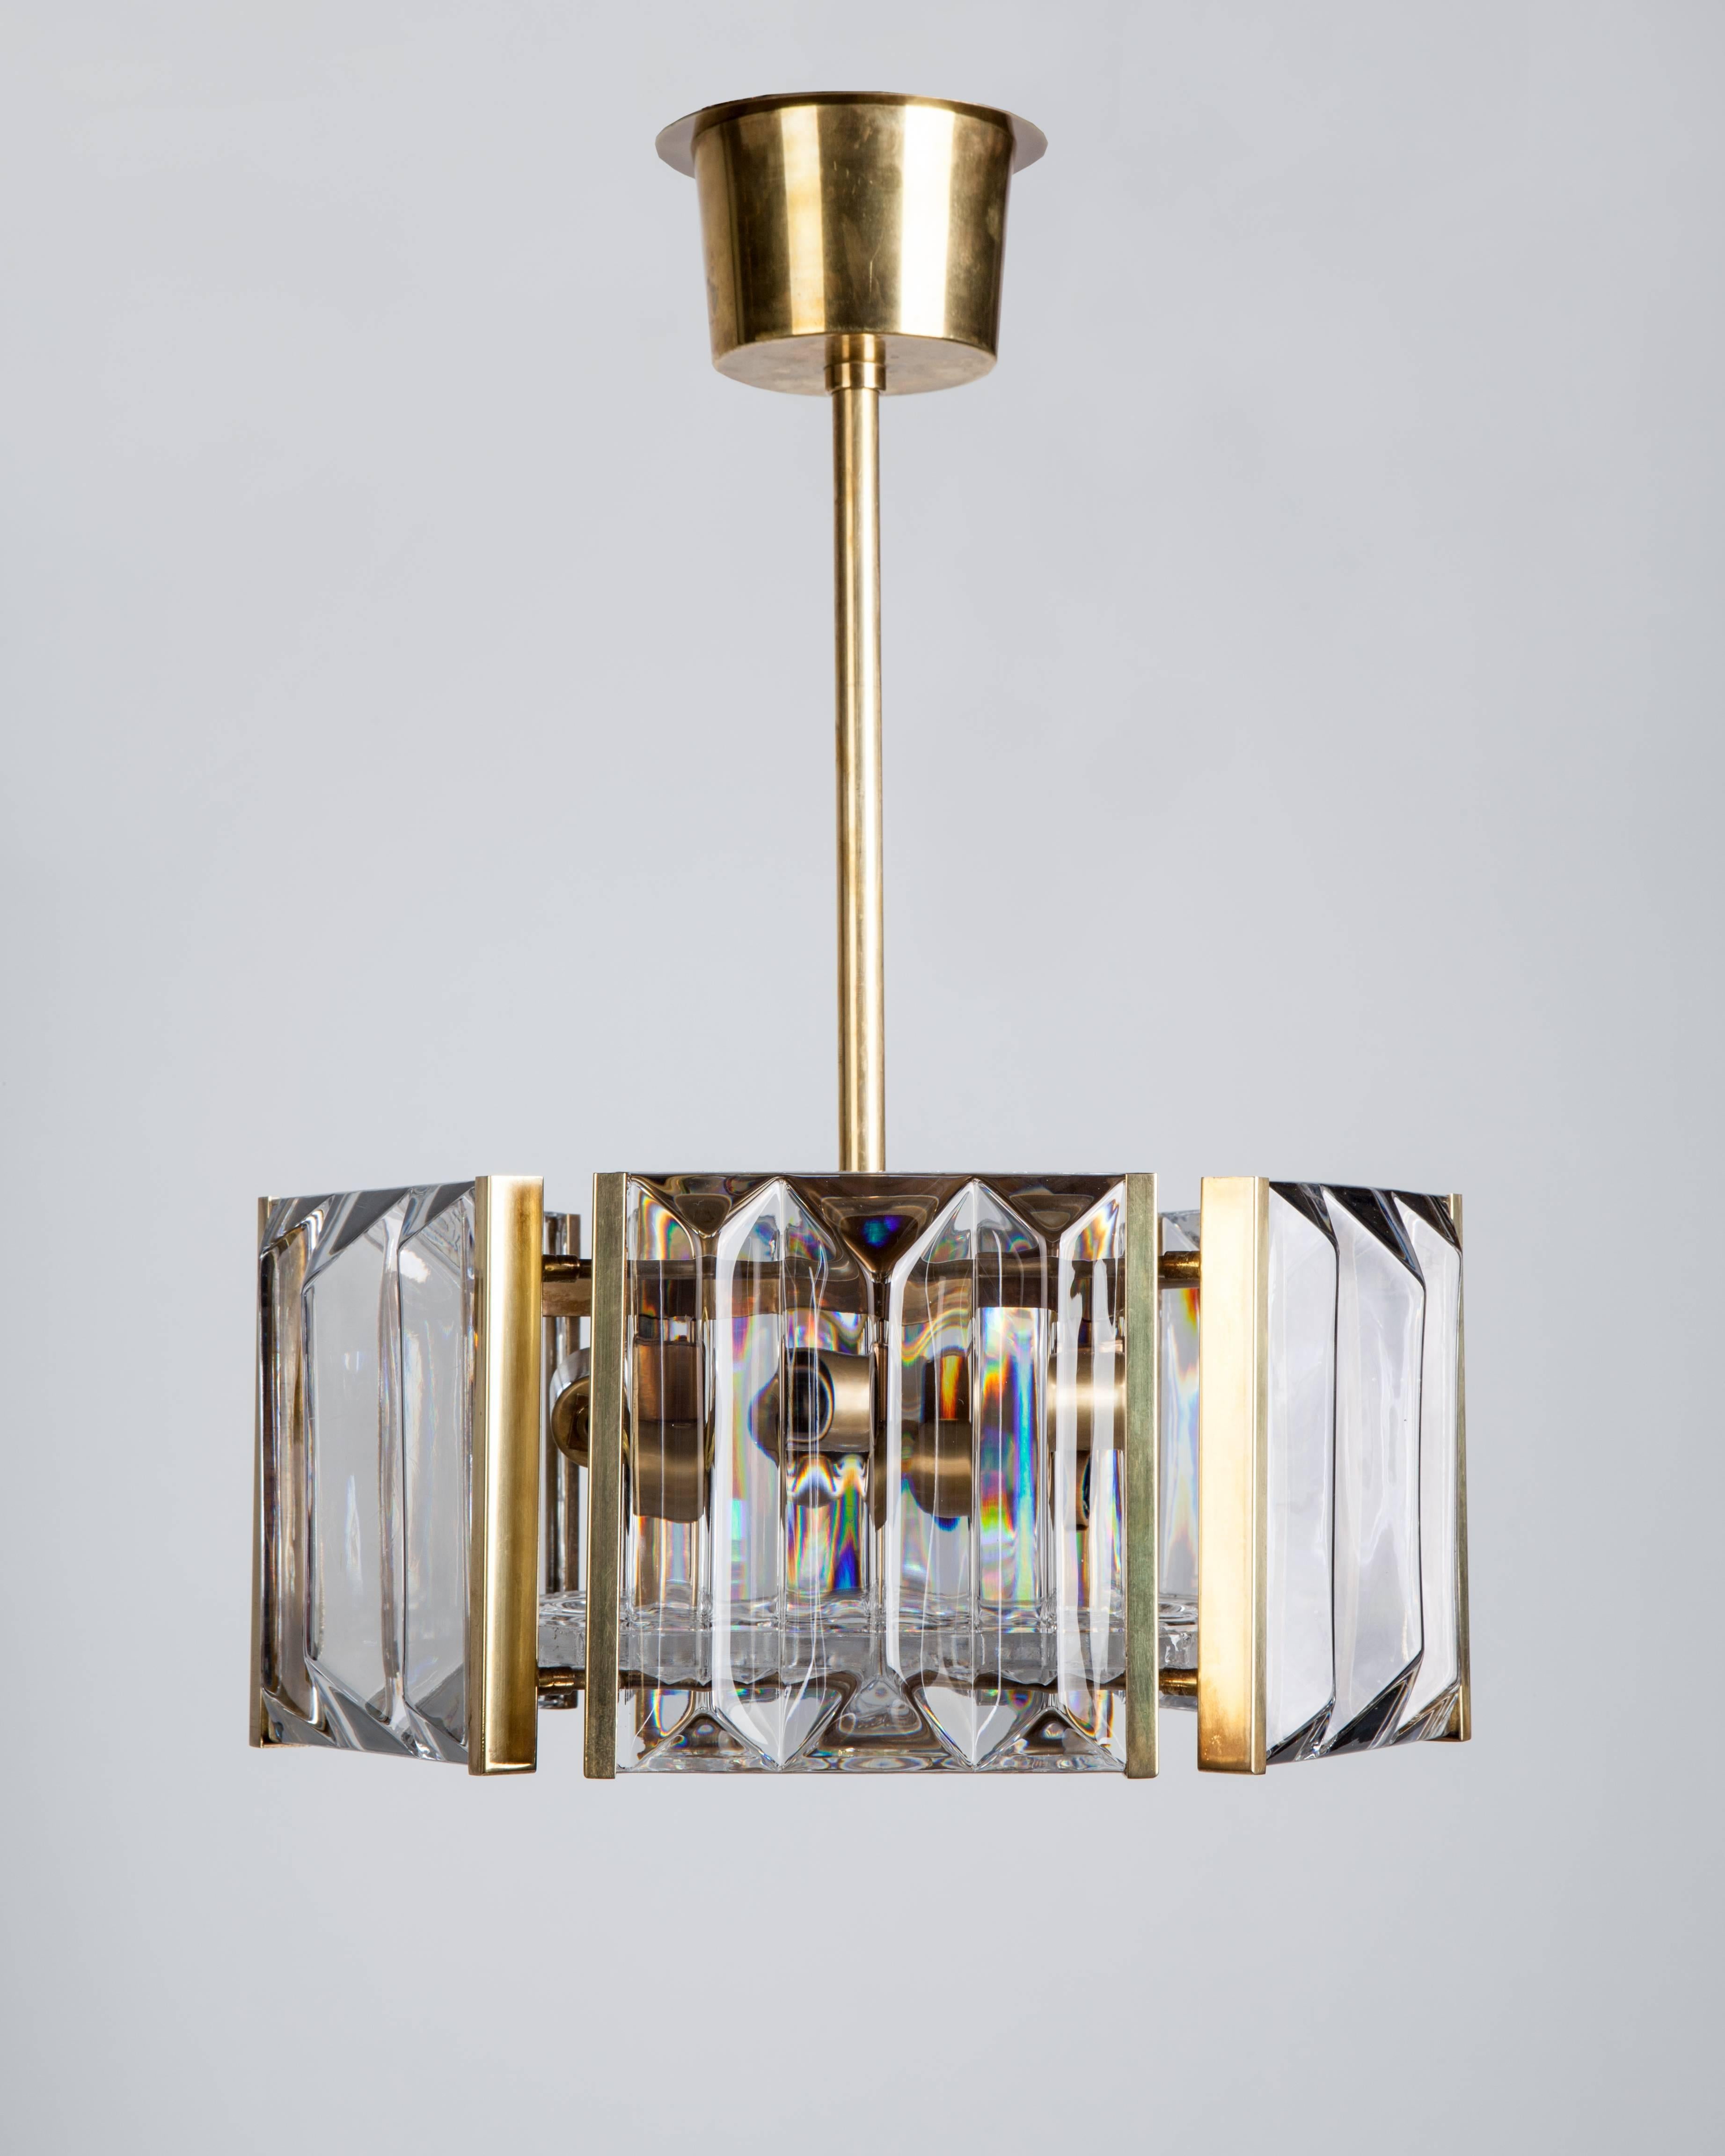 AHL3941

A hexagonal pendant, each face of the solid brass frame holding a faceted crystal block. Designed by Carl Fagerlund for the Swedish glassmaker Orrefors. Due to the antique nature of this fixture, there may be some nicks or imperfections